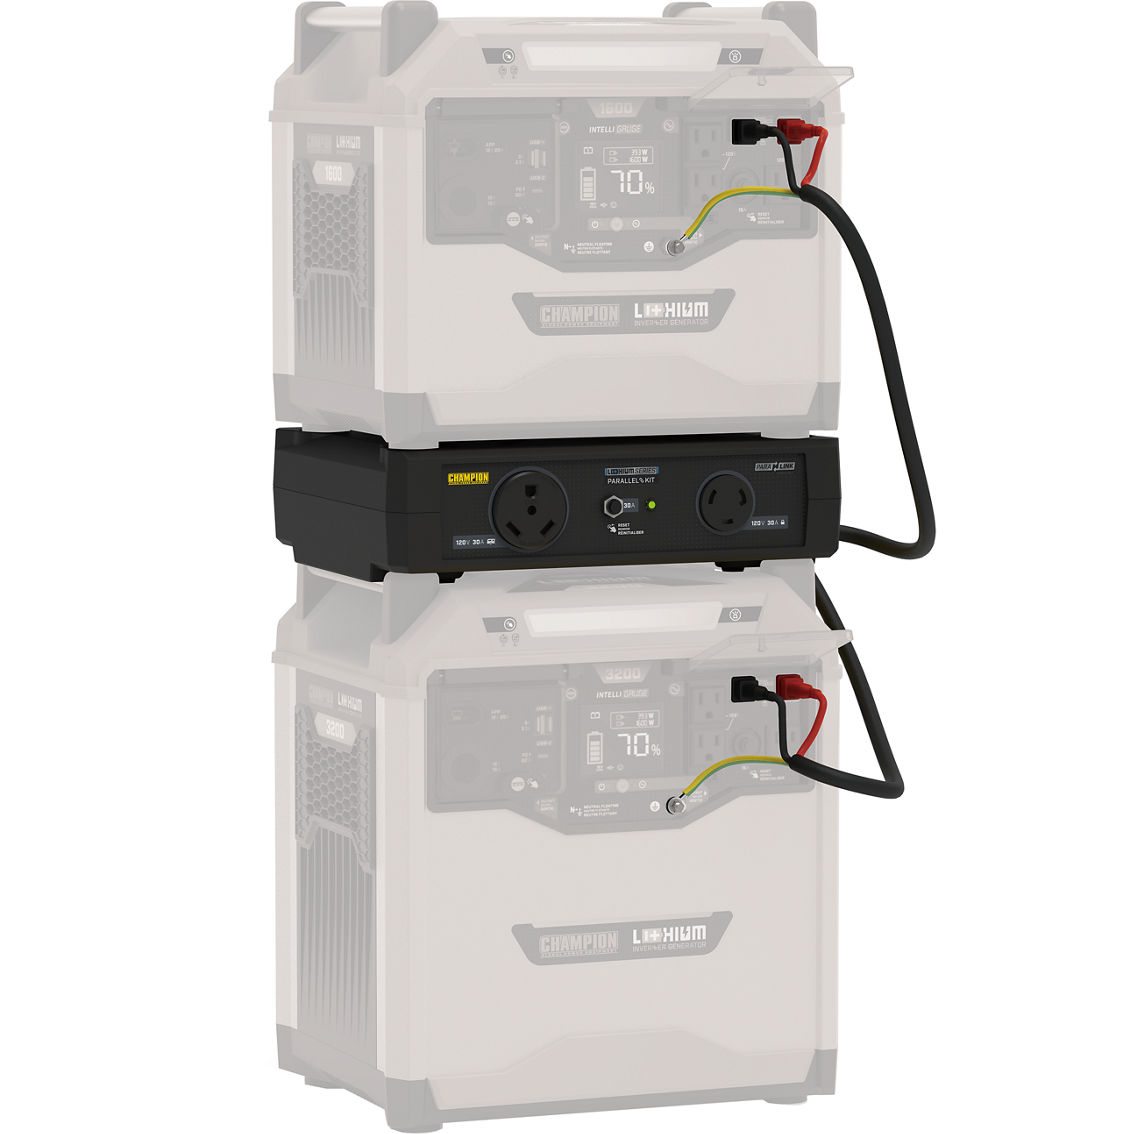 Champion Lithium Series 30-Amp RV Ready Parallel Kit for Linking Power Stations - Image 3 of 8